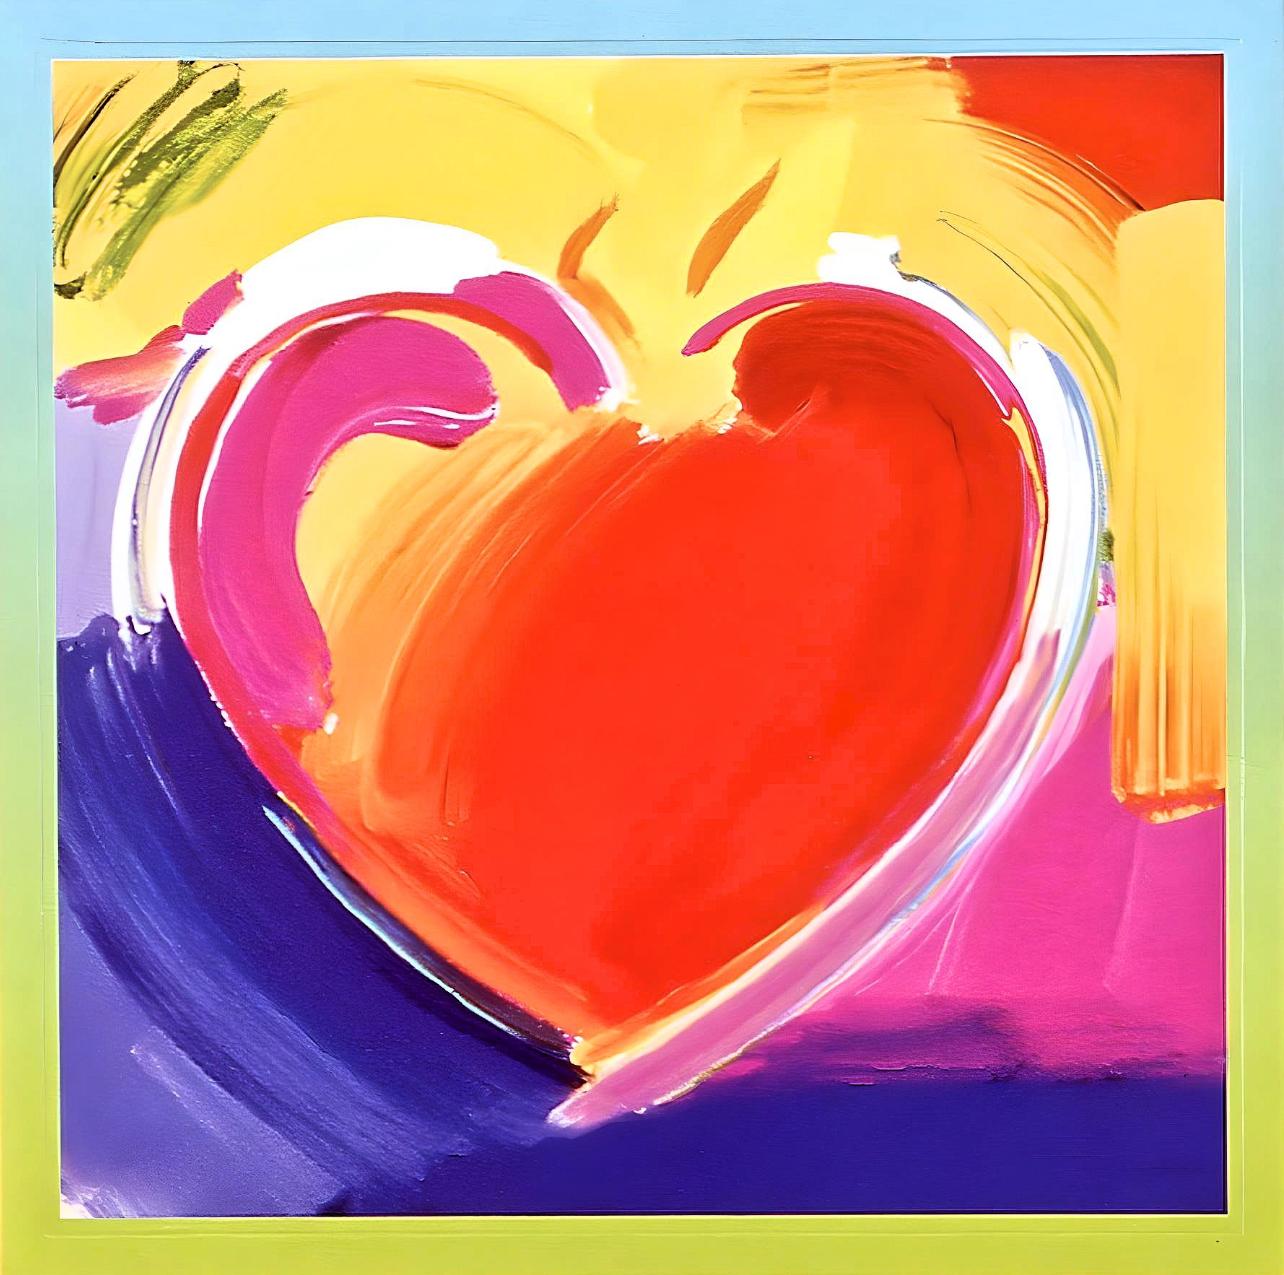 Heart on Blends, Peter Max 2